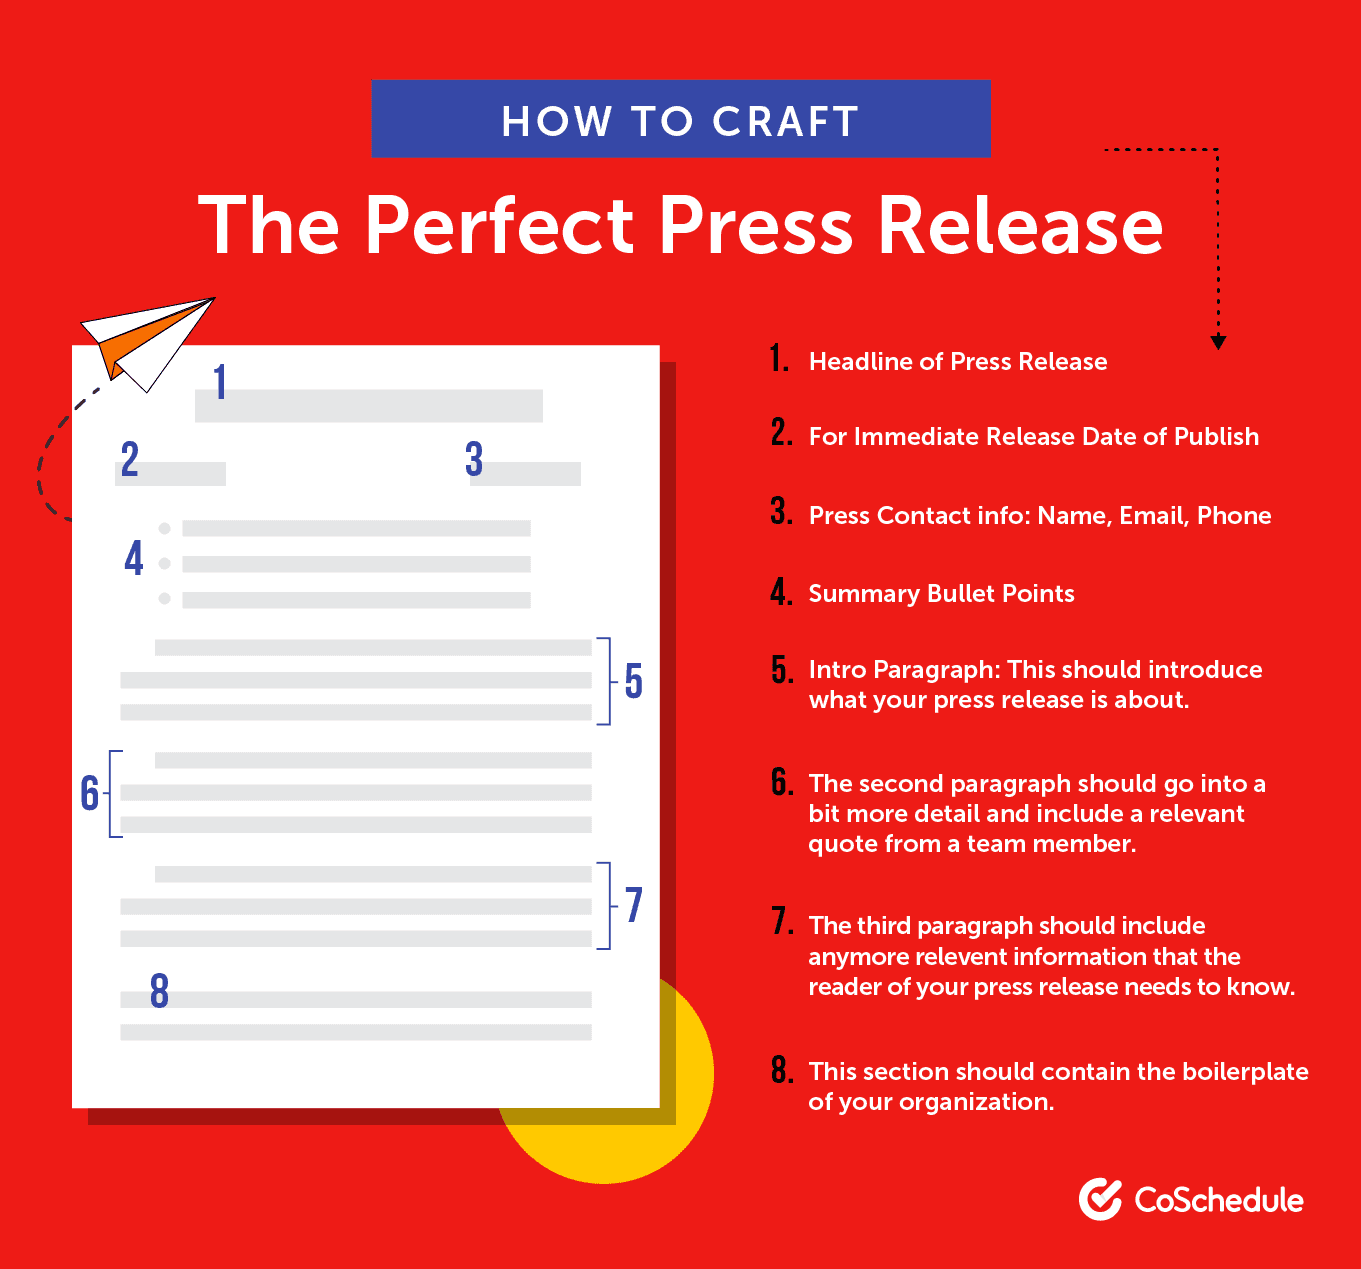 How to craft the perfect press release in 5 steps